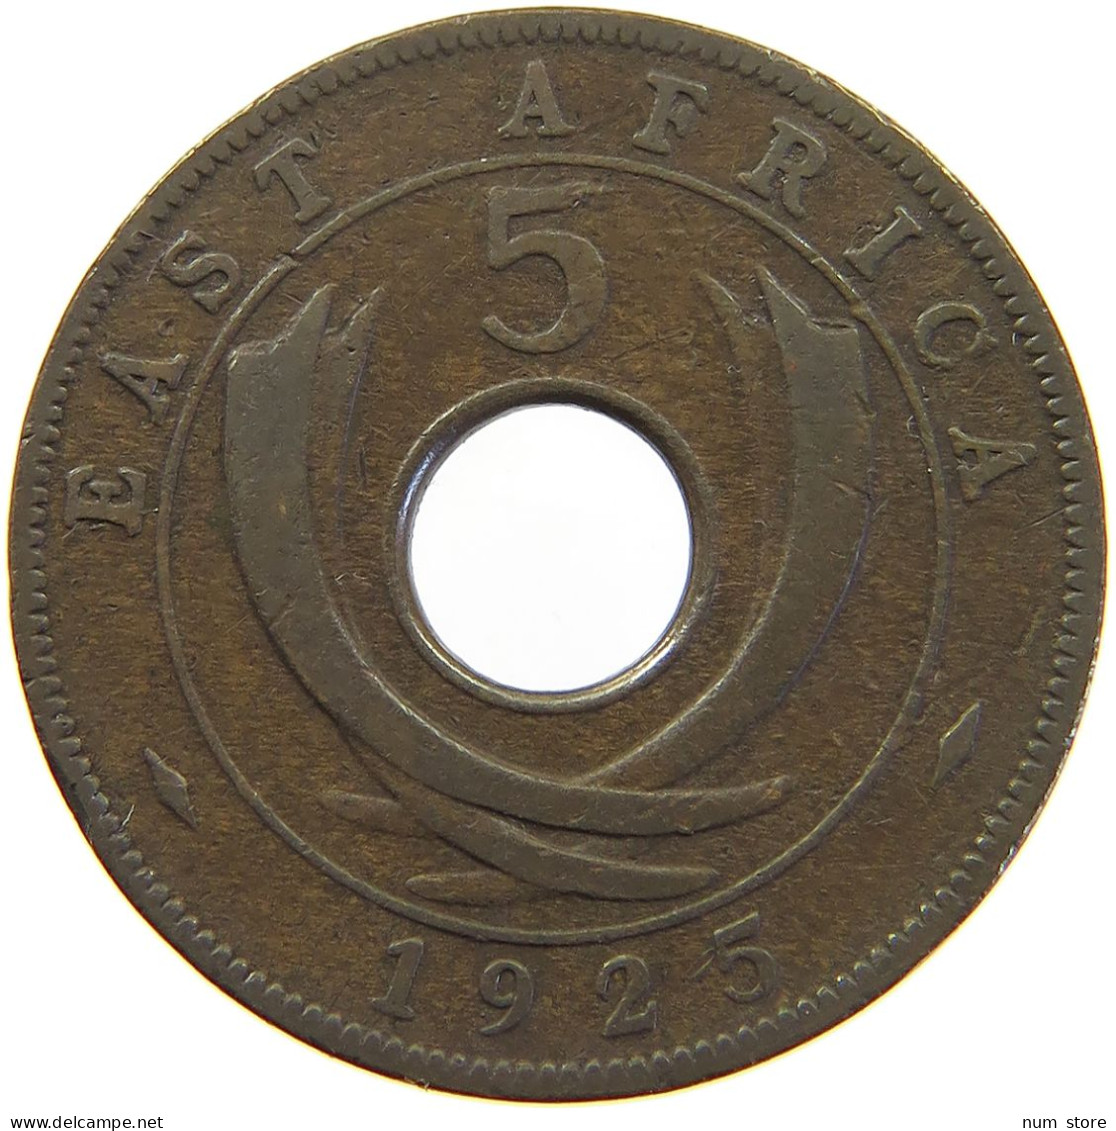 EAST AFRICA 5 CENTS 1925 GEORGE V. (1910-1936) #MA 065522 - Britische Kolonie